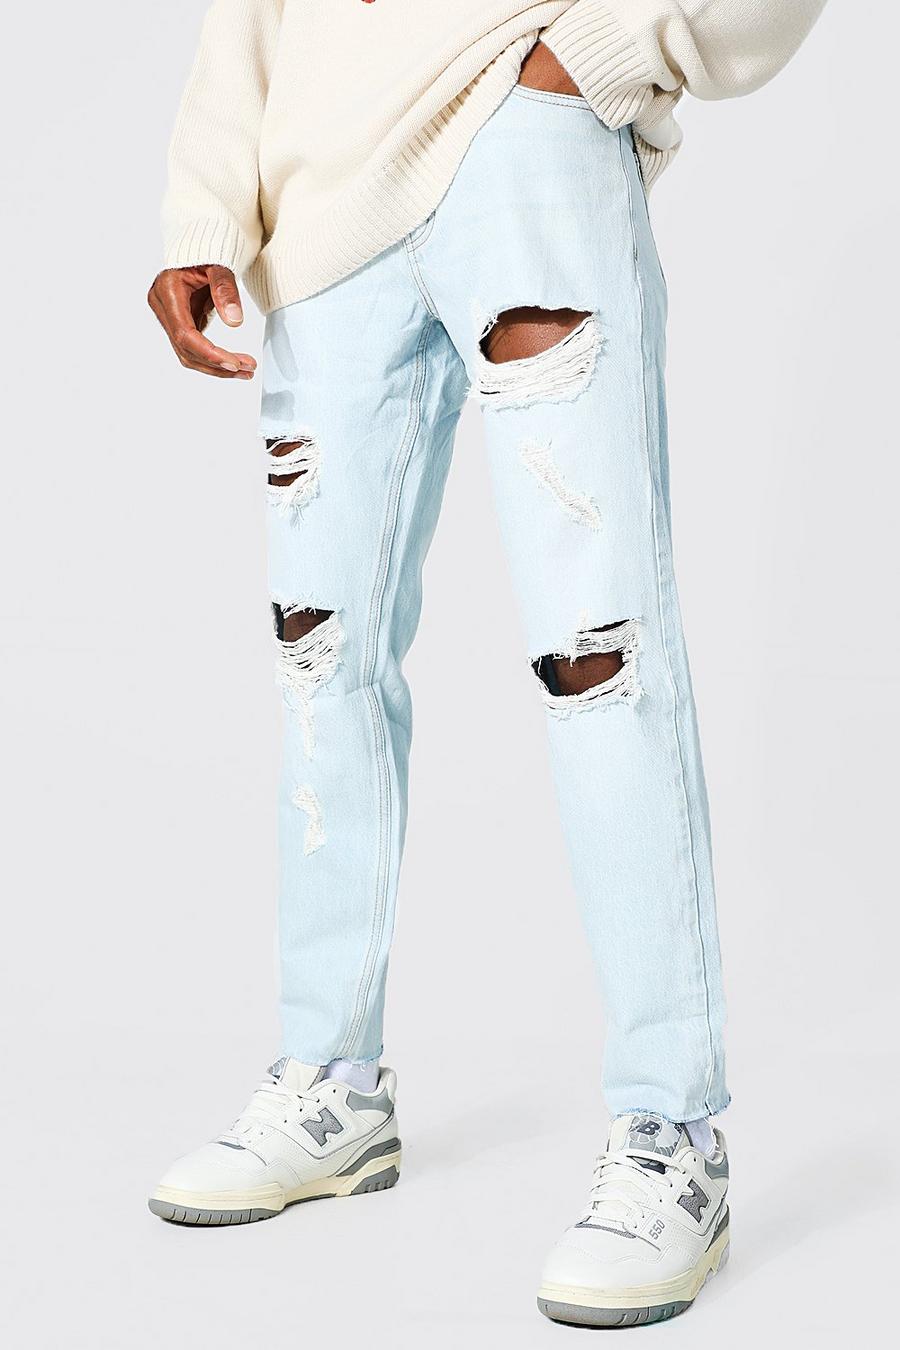 for Men BoohooMAN Denim Tall Slim Fit Distressed Hem Ripped Jeans in Ice Blue Blue Mens Clothing Jeans Slim jeans 